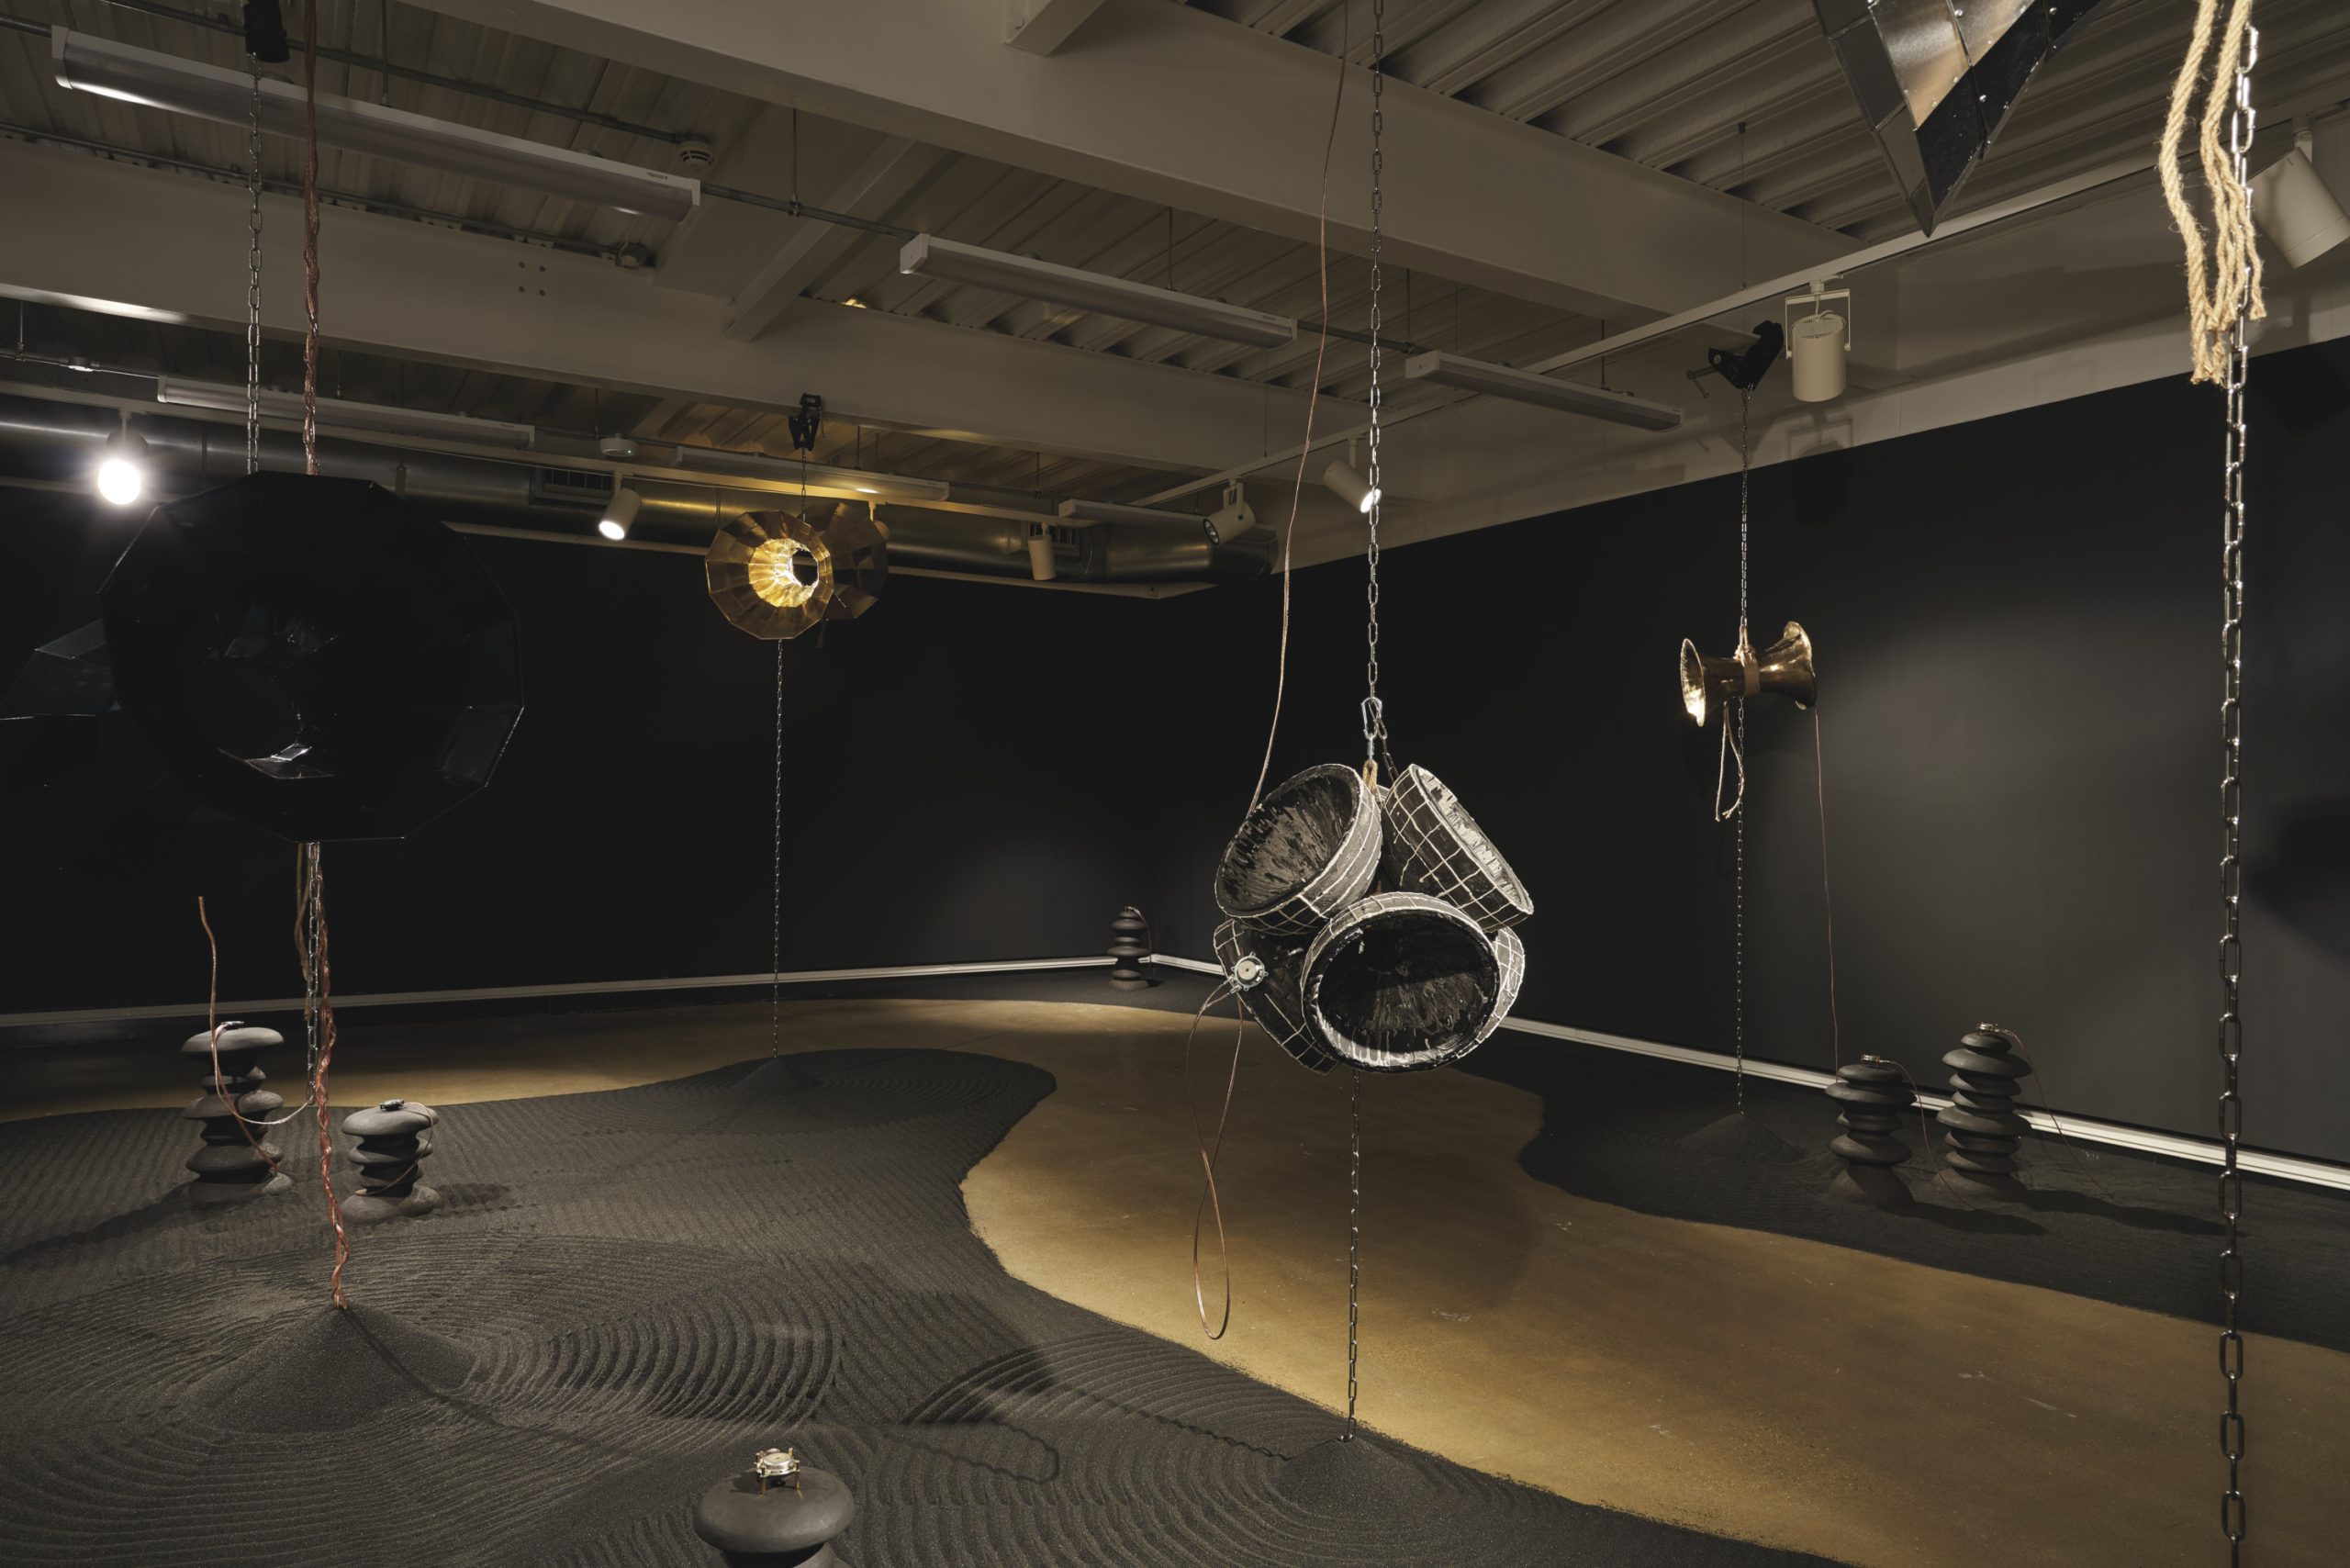 Exhibition space with metal wormholes suspended from the ceiling and black sand in circular patterns with neat towers of rocks on the floor.